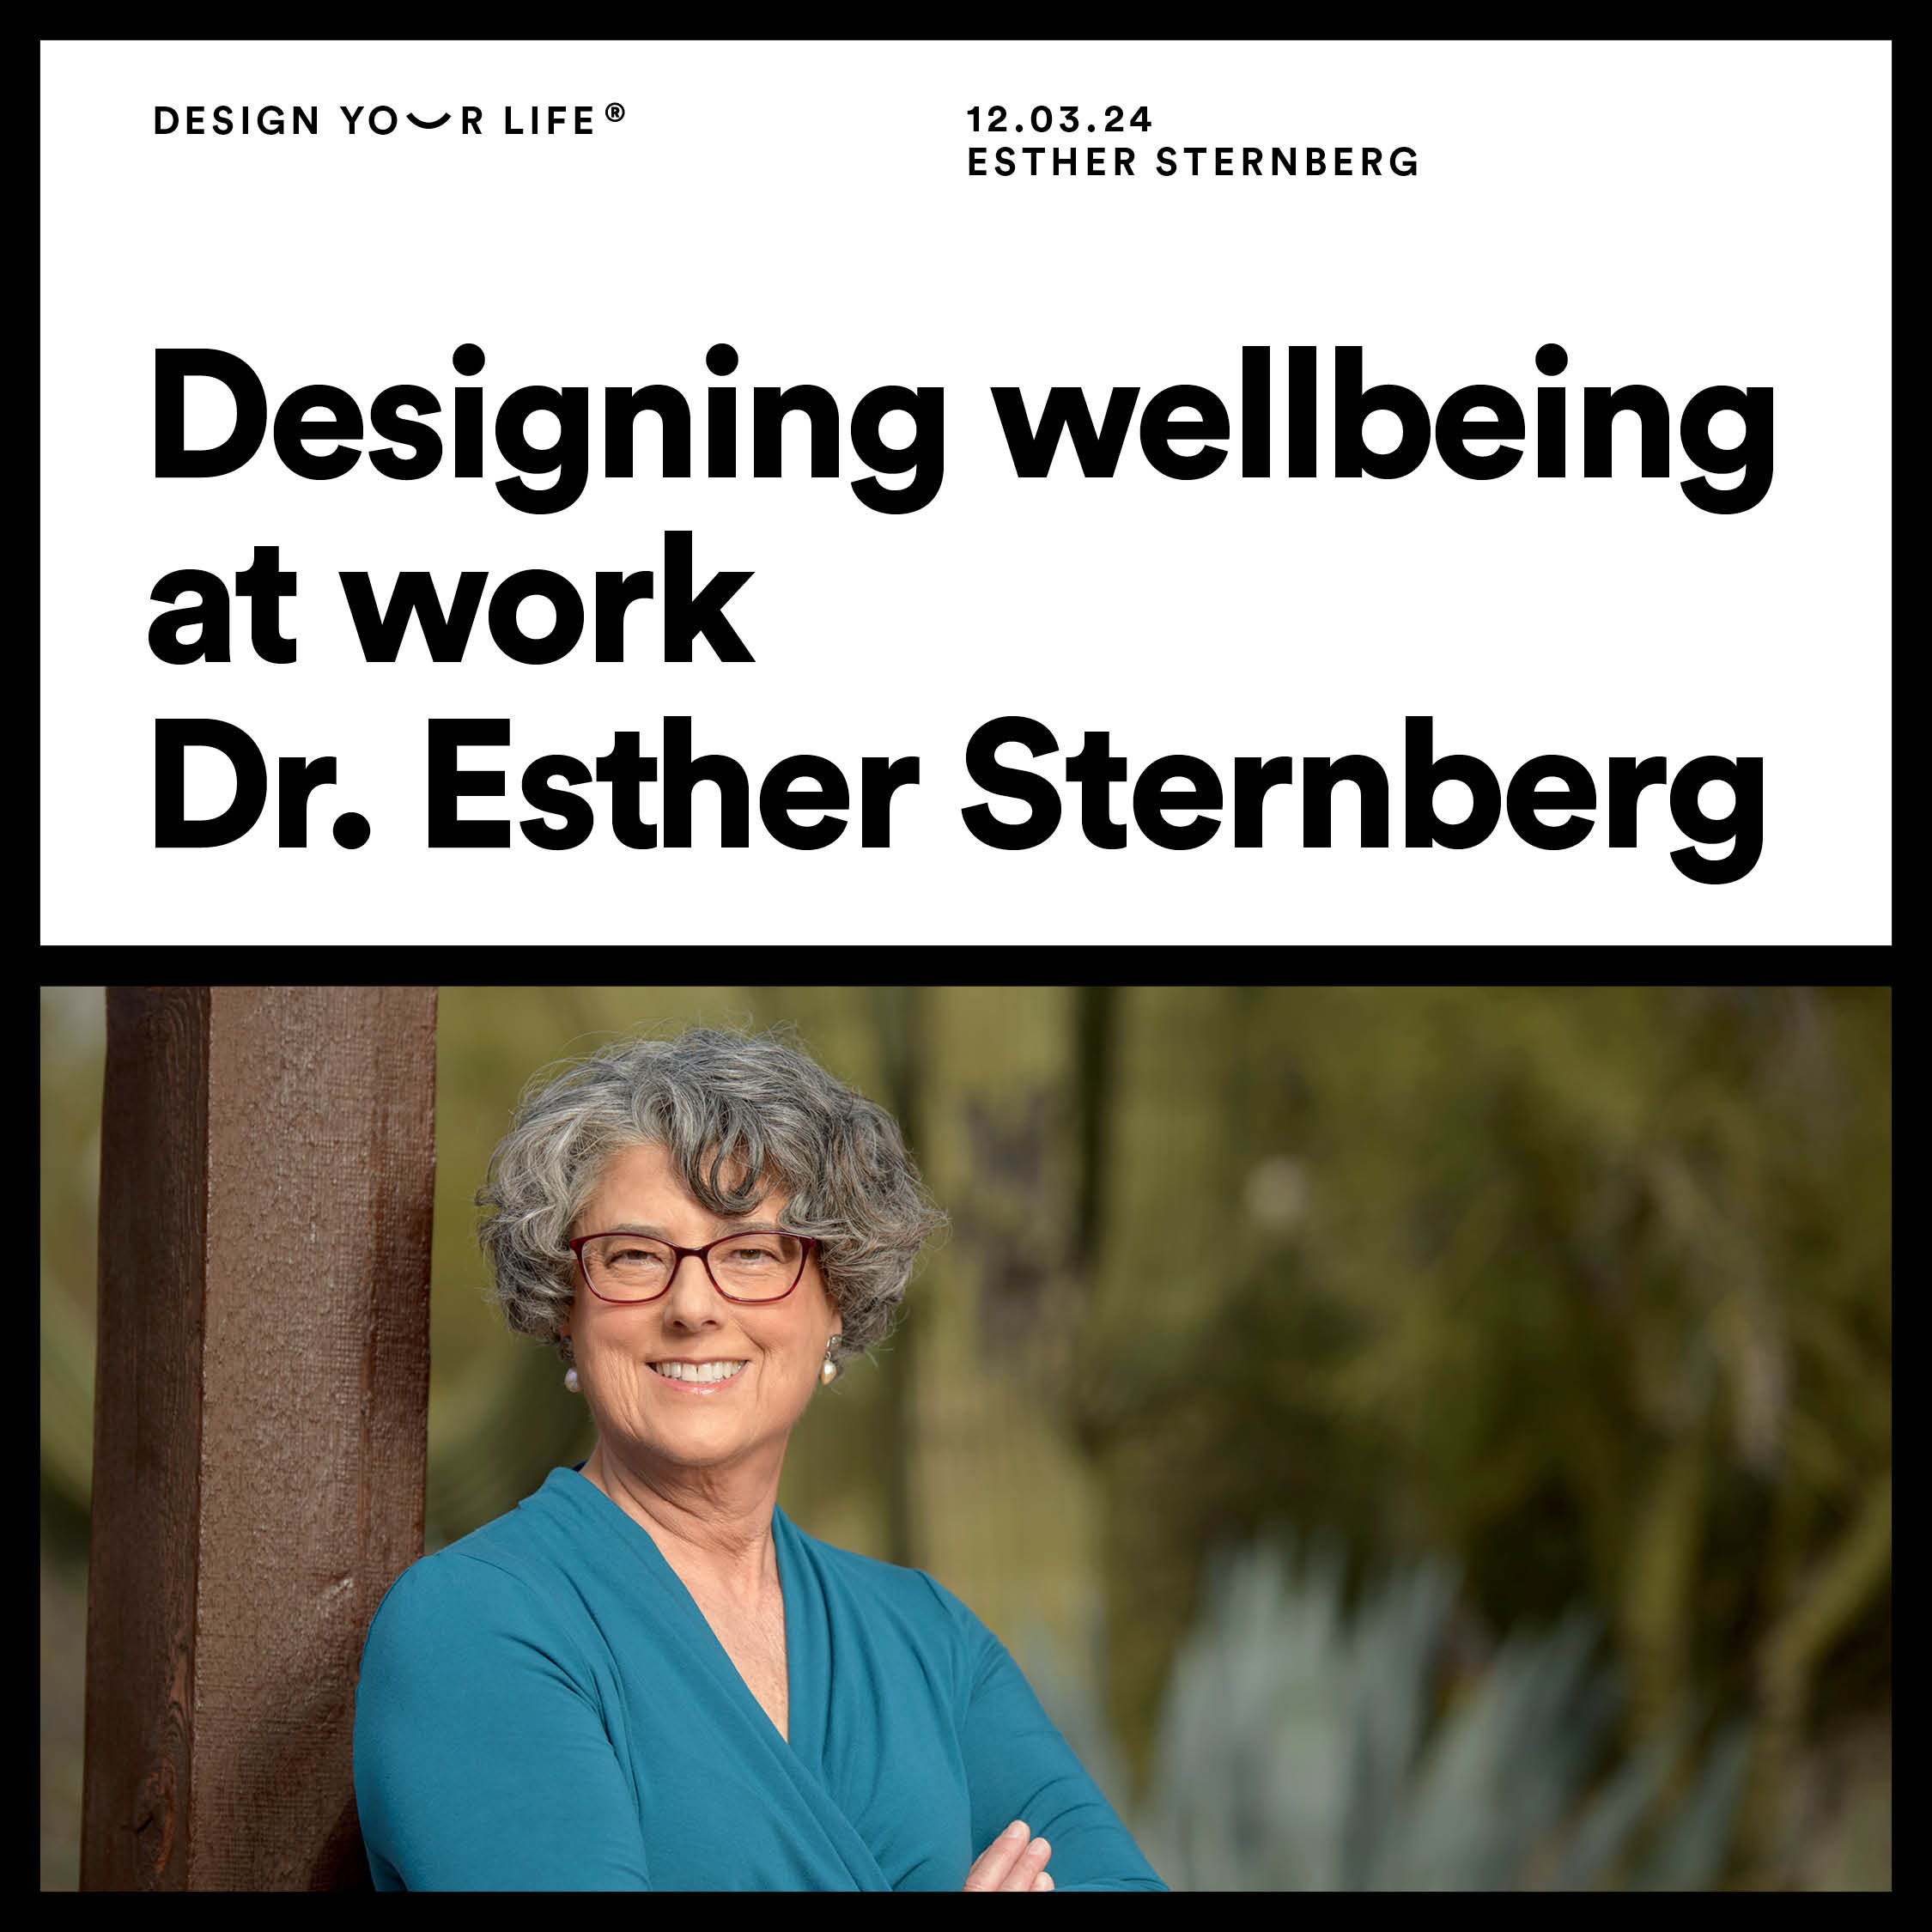 Designing wellbeing at work with Dr. Esther Sternberg